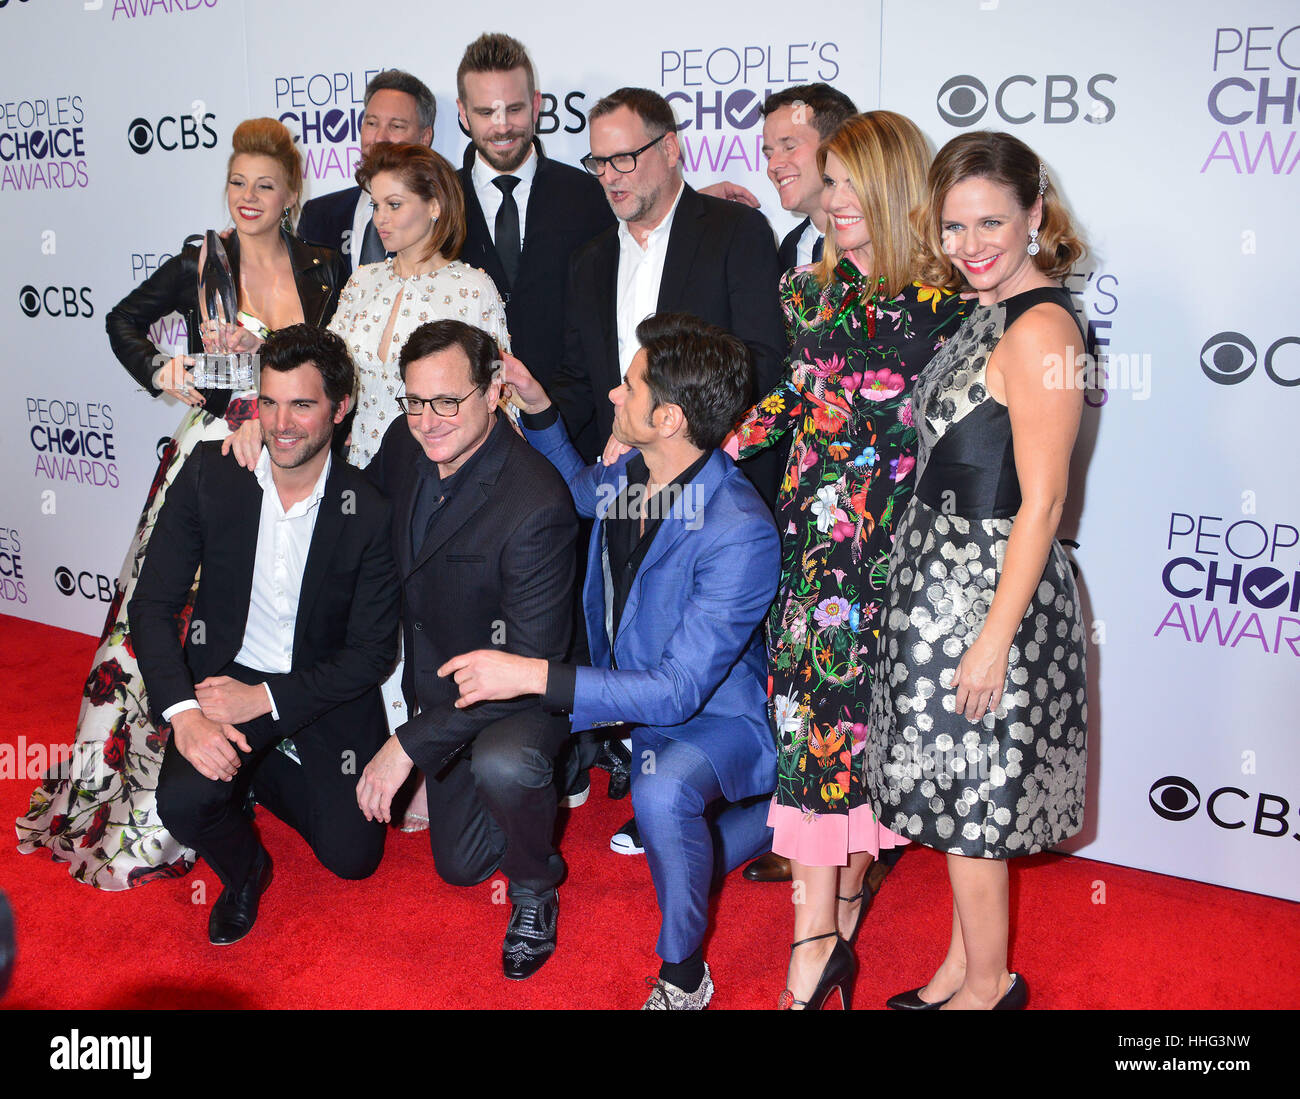 Jodie Sweetin, producer Jeff Franklin, actors Candace Cameron Bure, John Brotherton, Dave Coulier, Scott Weinger, Lori Loughlin, Andrea Barber arriving at the People's Choice Awards 2017 at the Microsoft Theatre in Los Angeles. January 18, 2017. Stock Photo